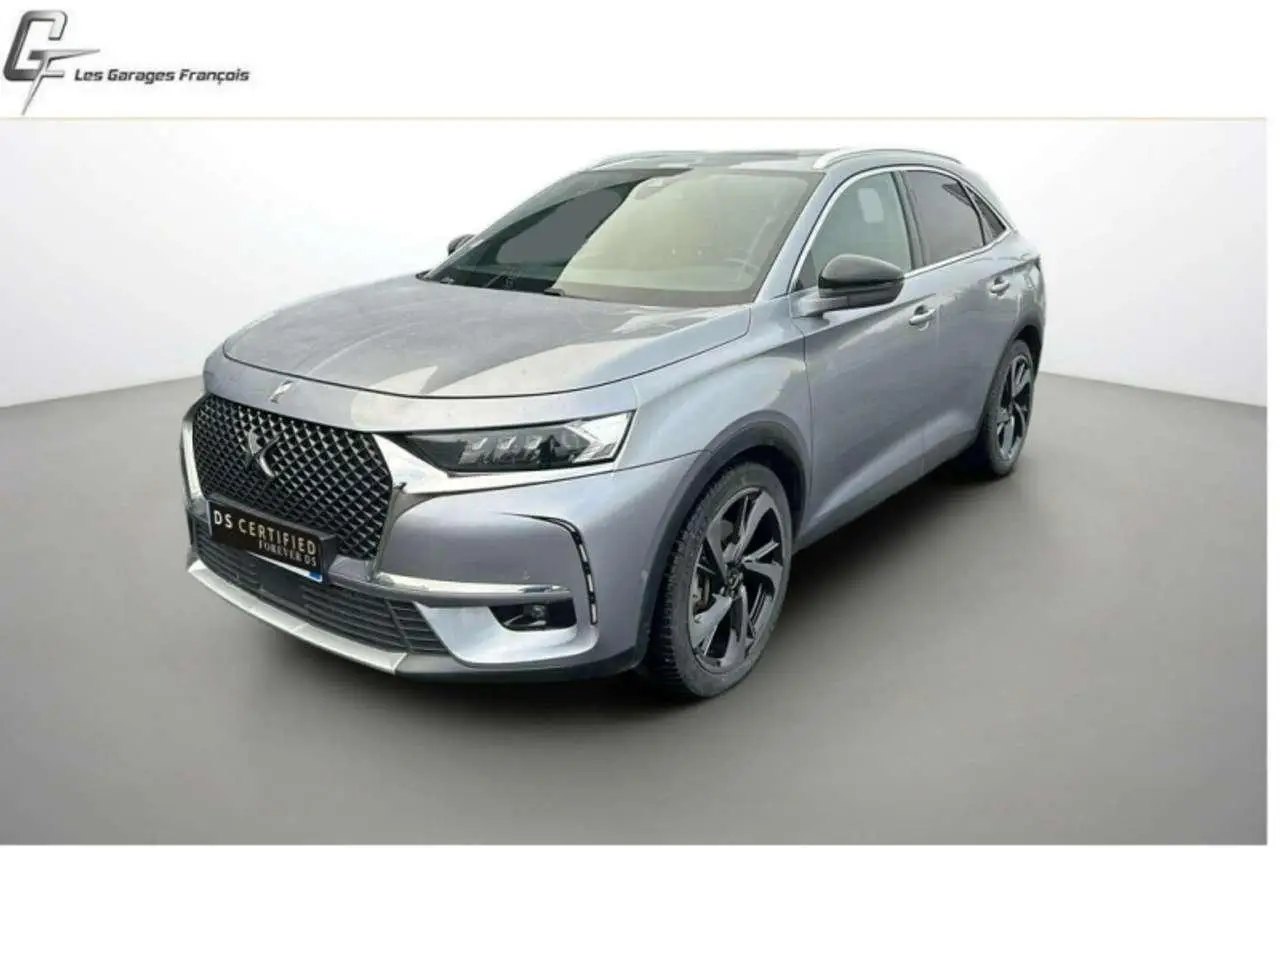 Photo 1 : Ds Automobiles Ds7 2020 Others